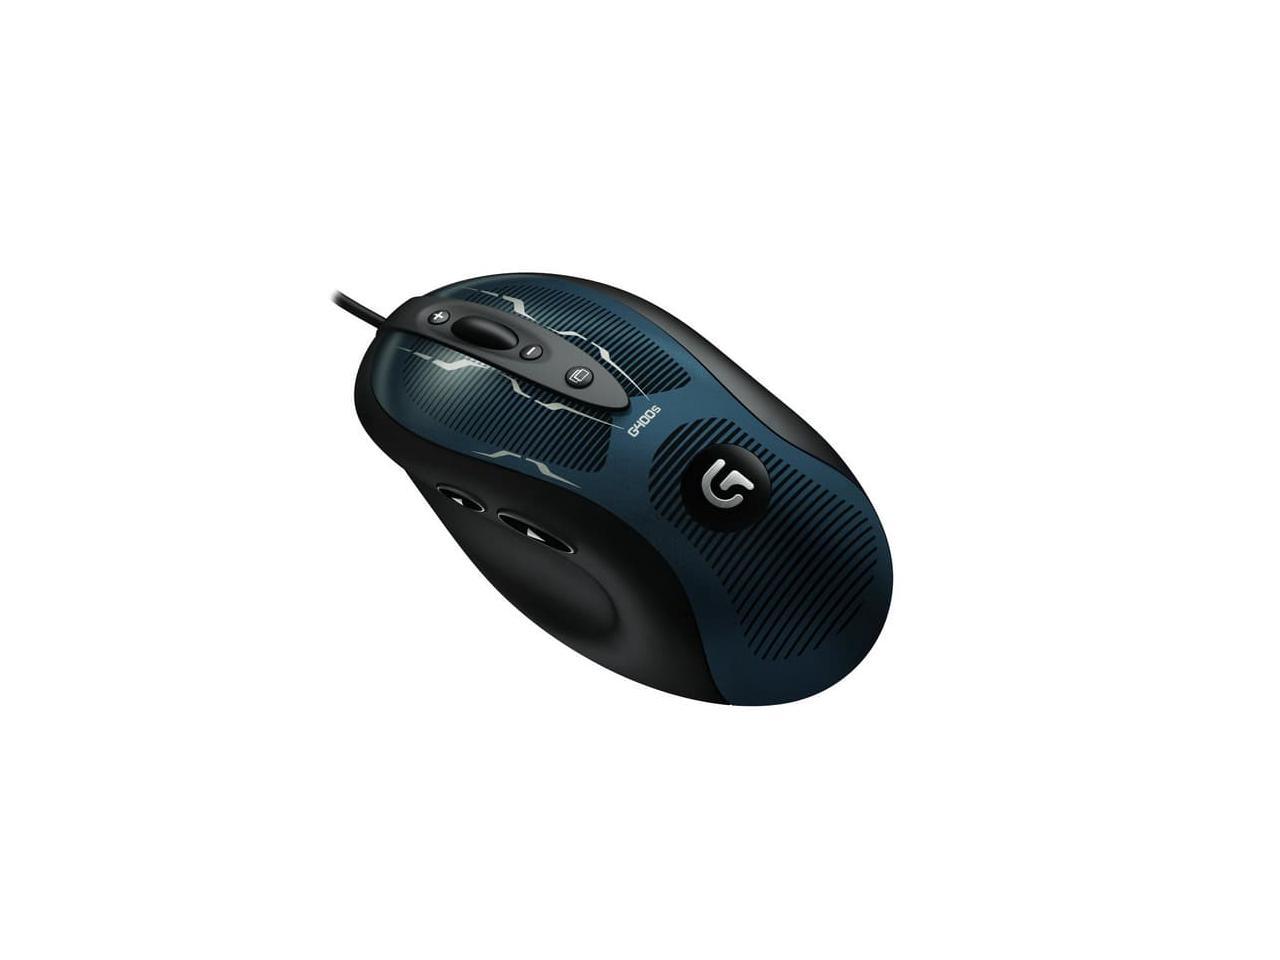 Brand new Logitech G400s 910-003589 Optical Gaming Mouse 